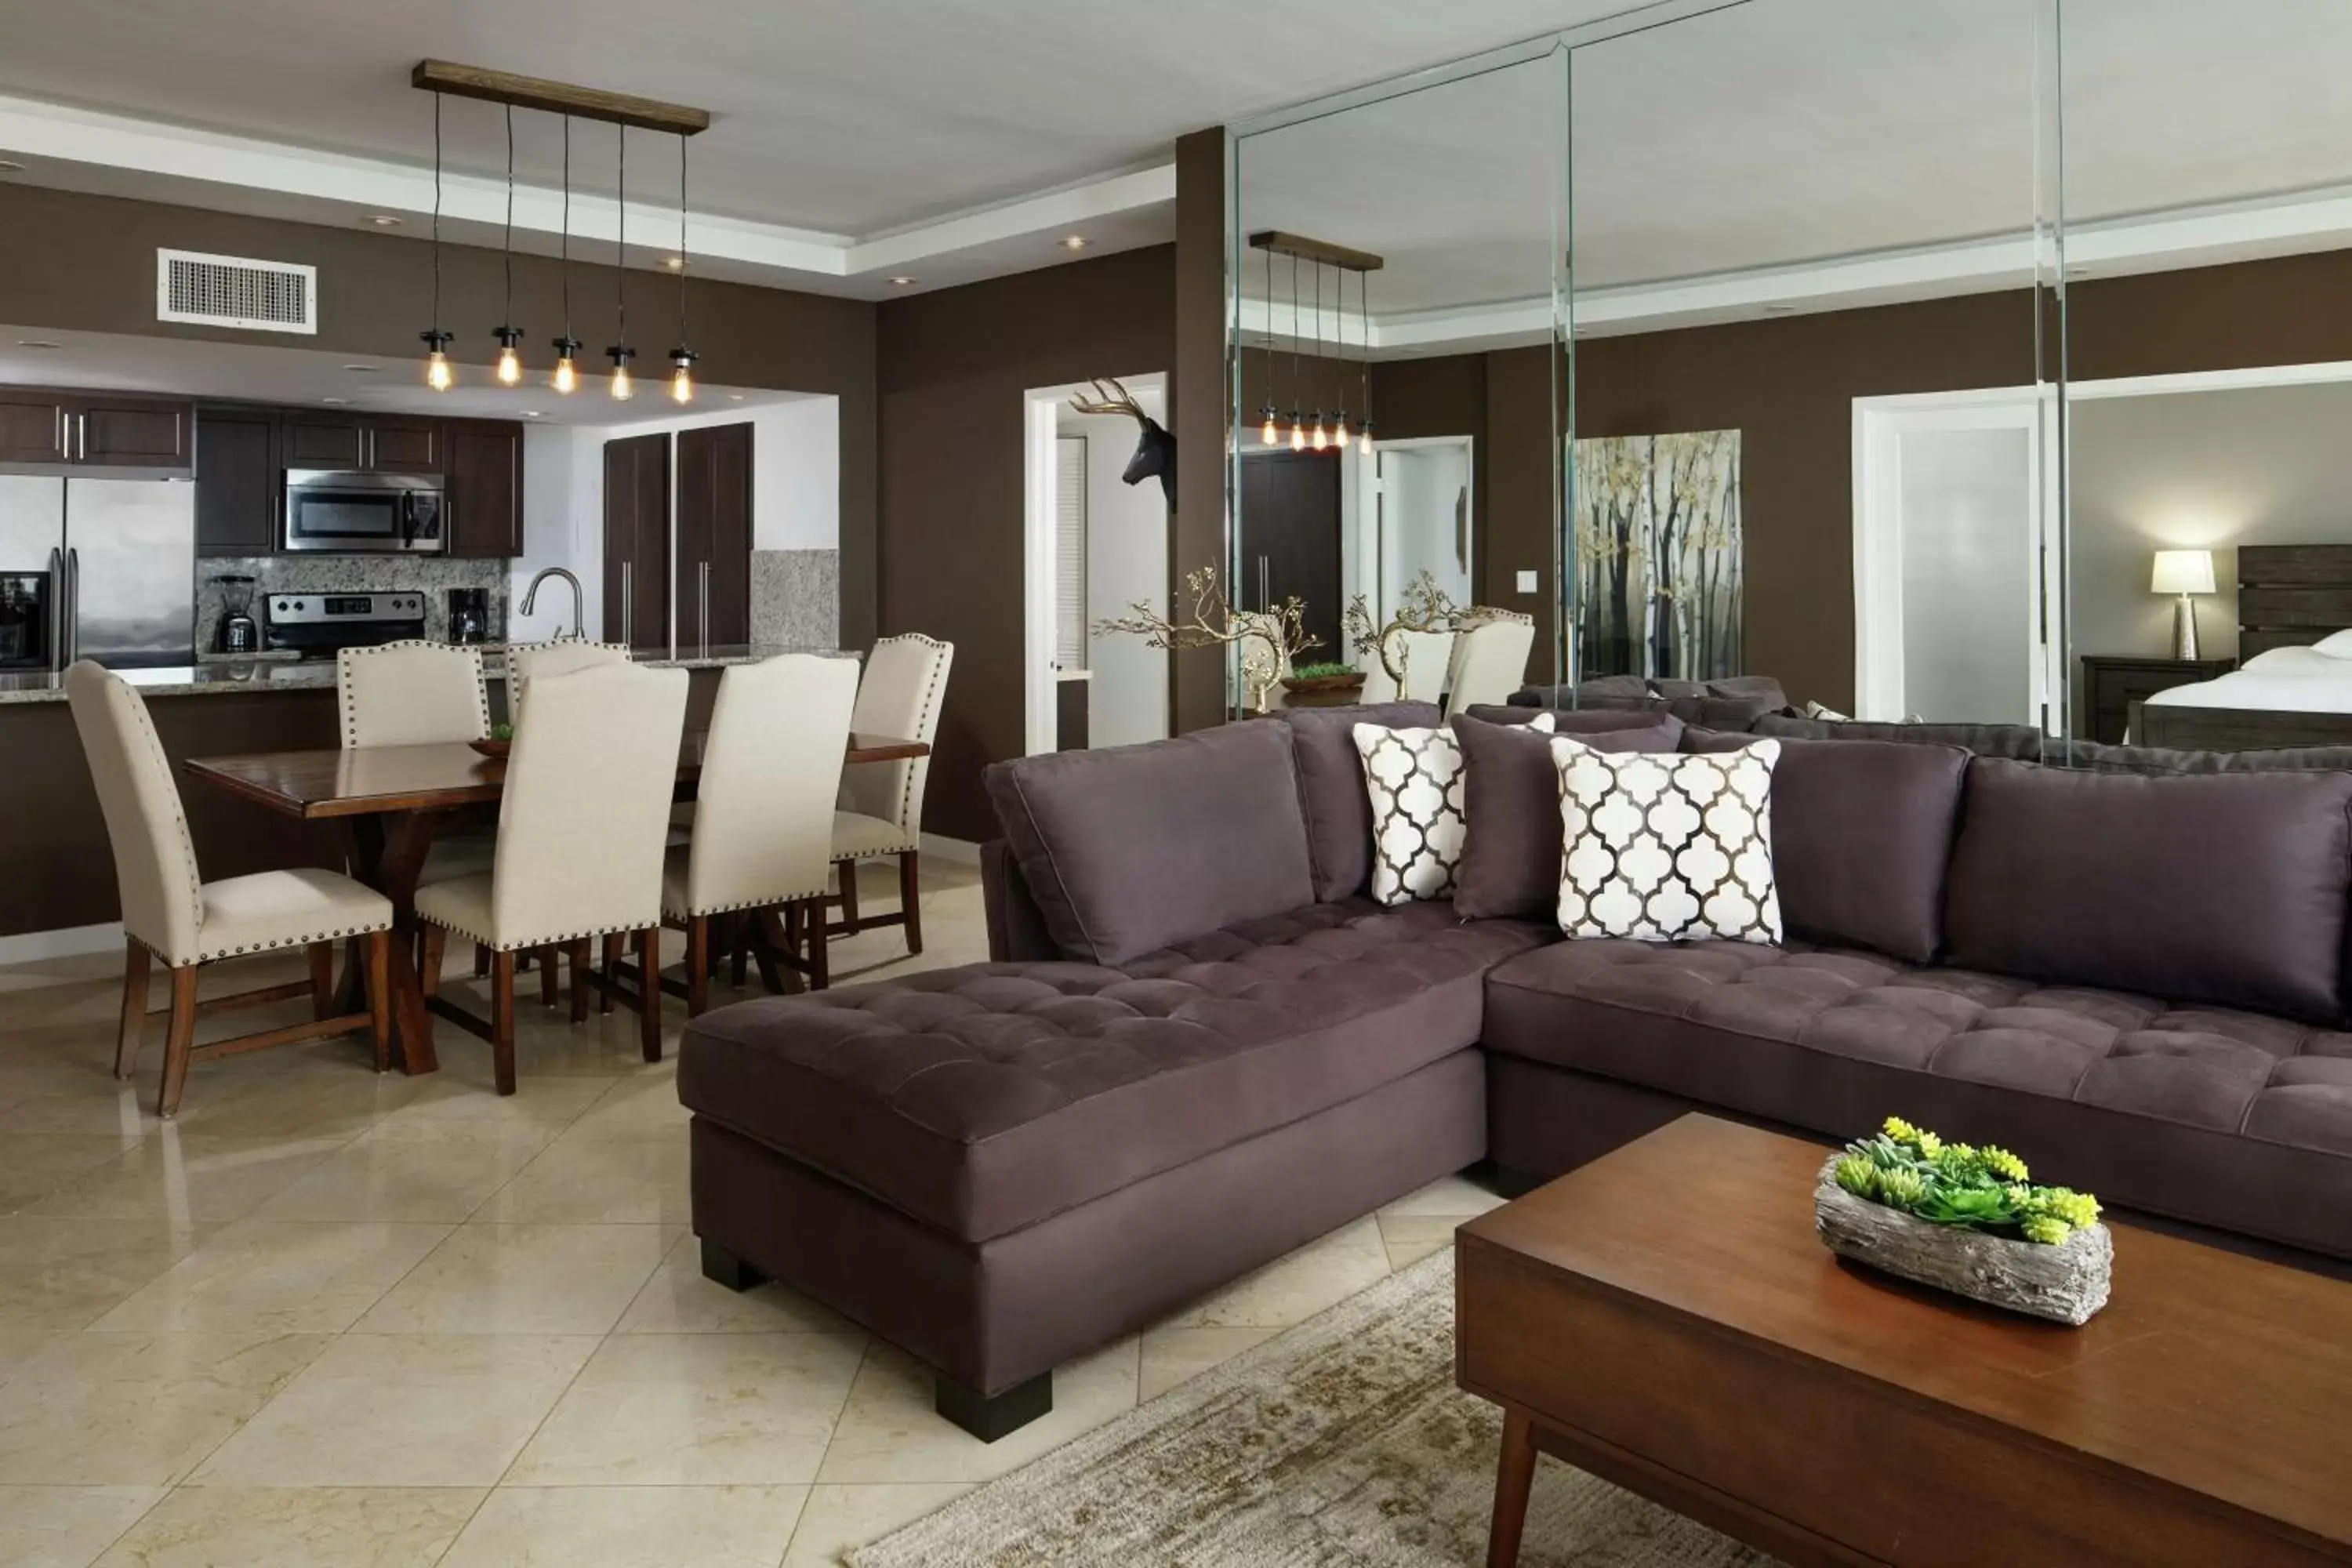 Living room in DoubleTree by Hilton Grand Hotel Biscayne Bay